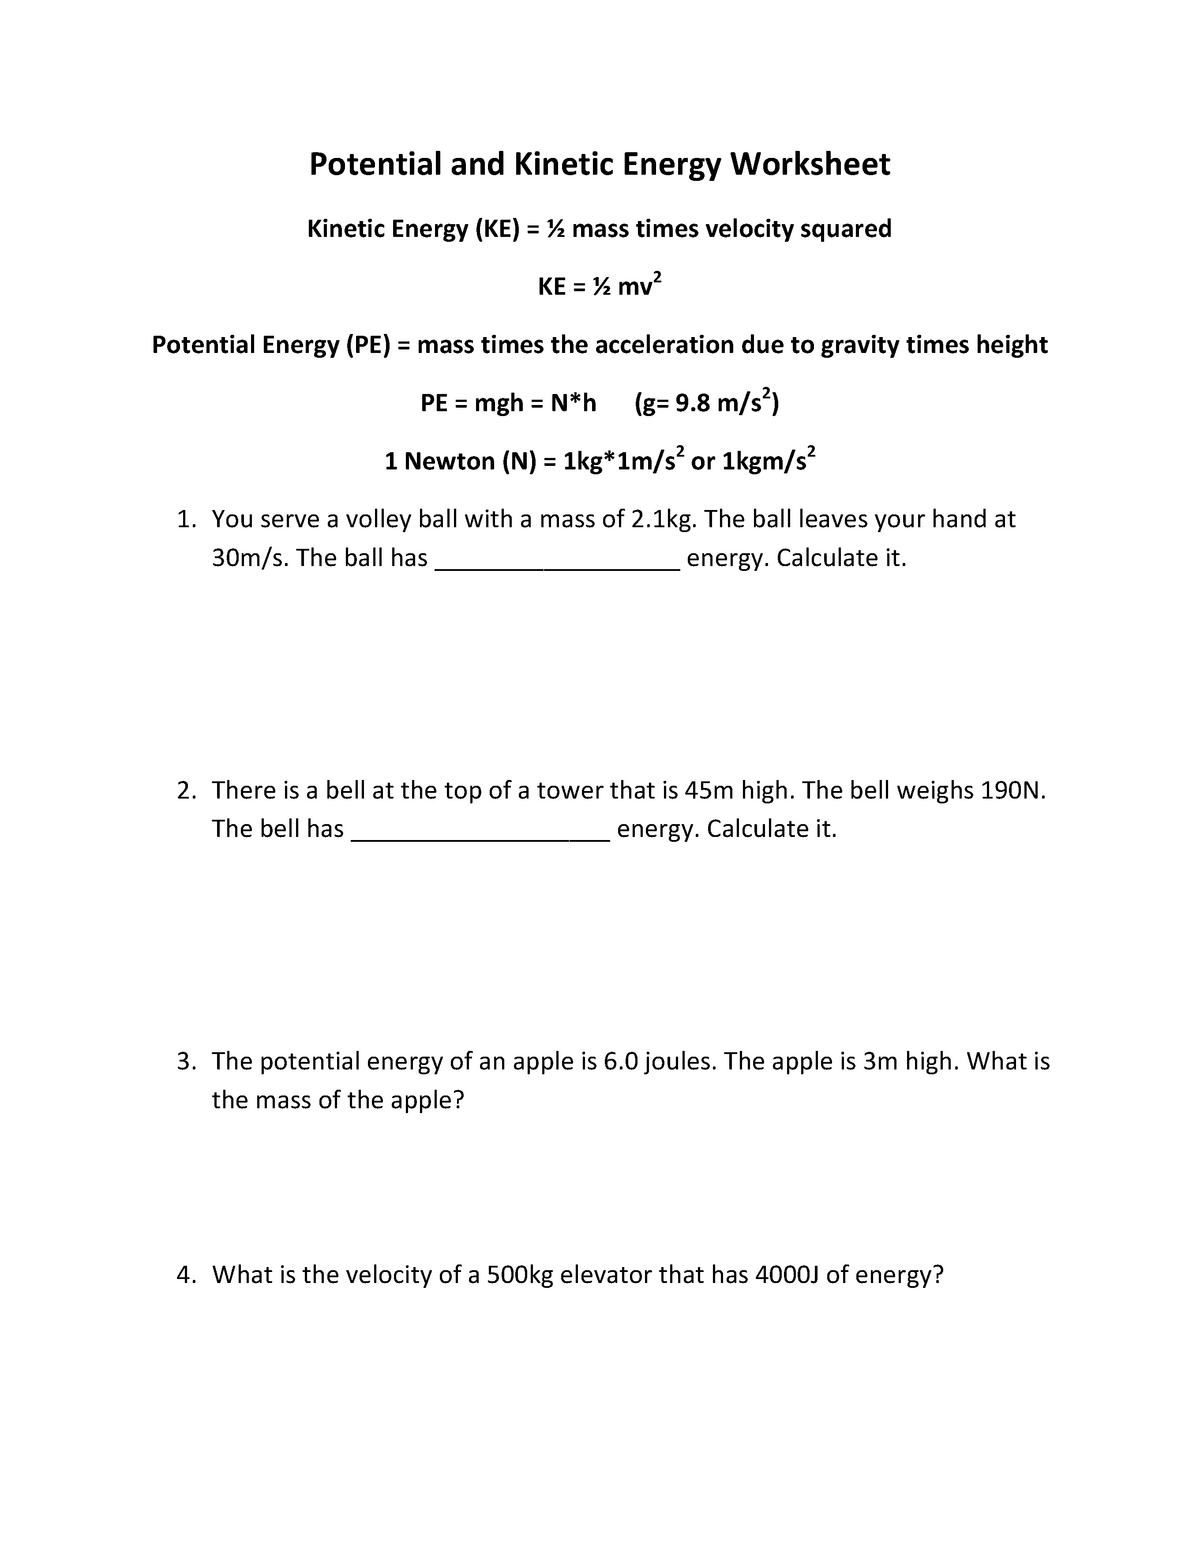 Potential and Kinetic Energy Worksheet - science - 20 - UAEU With Regard To Introduction To Energy Worksheet